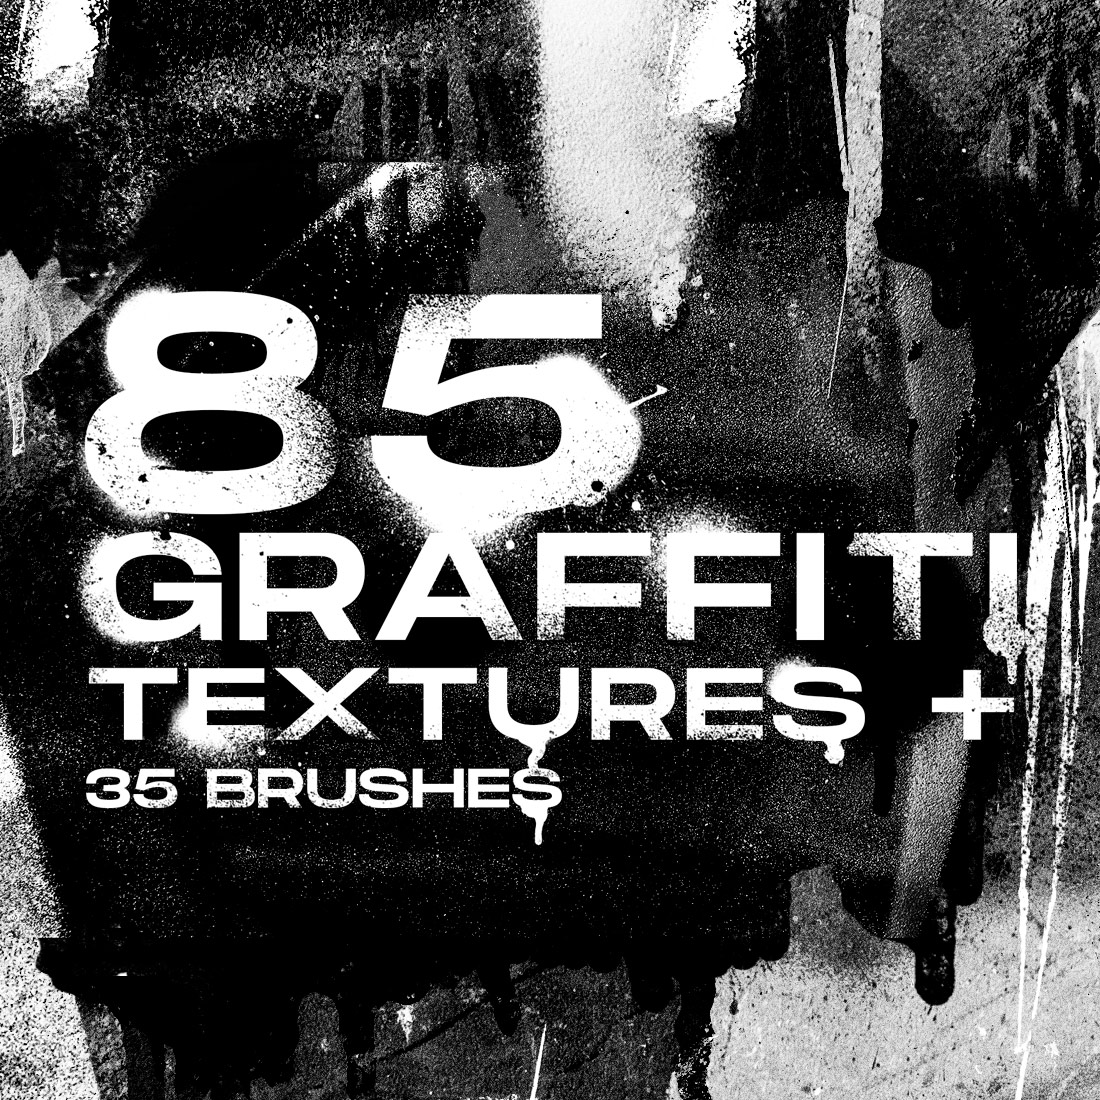 Graffiti Texture and Brushes for Procreate cover image.